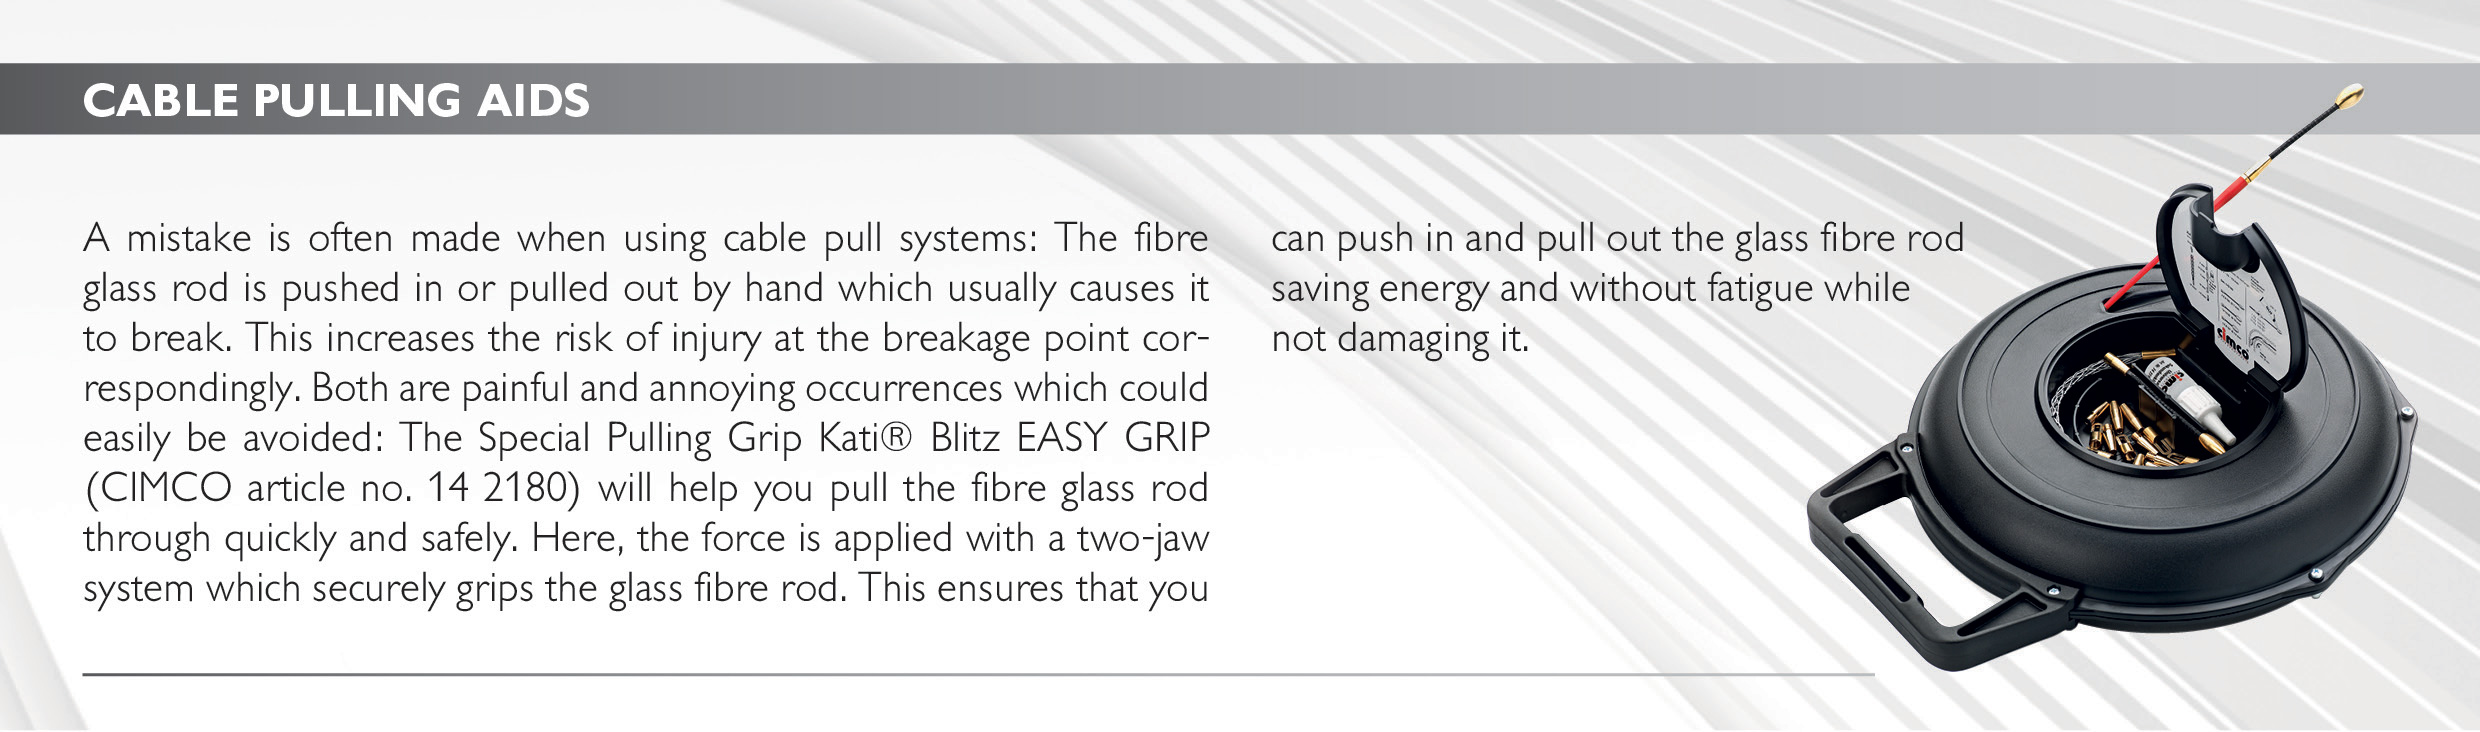 CABLE PULLING AIDS
A mistake is often made when using cable pull systems: The fibre glass rod is pushed in or pulled out by hand which usually causes it to break. This increases the risk of injury at the breakage point correspondingly. Both are painful and annoying occurrences which could easily be avoided: The Special Pulling Grip Kati® Blitz EASY GRIP (CIMCO article no. 14 2180) will help you pull the fibre glass rod through quickly and safely. Here, the force is applied with a two-jaw system which securely grips the glass fibre rod. This ensures that you can push in and pull out the glass fibre rod 
saving energy and without fatigue while 
not damaging it. 